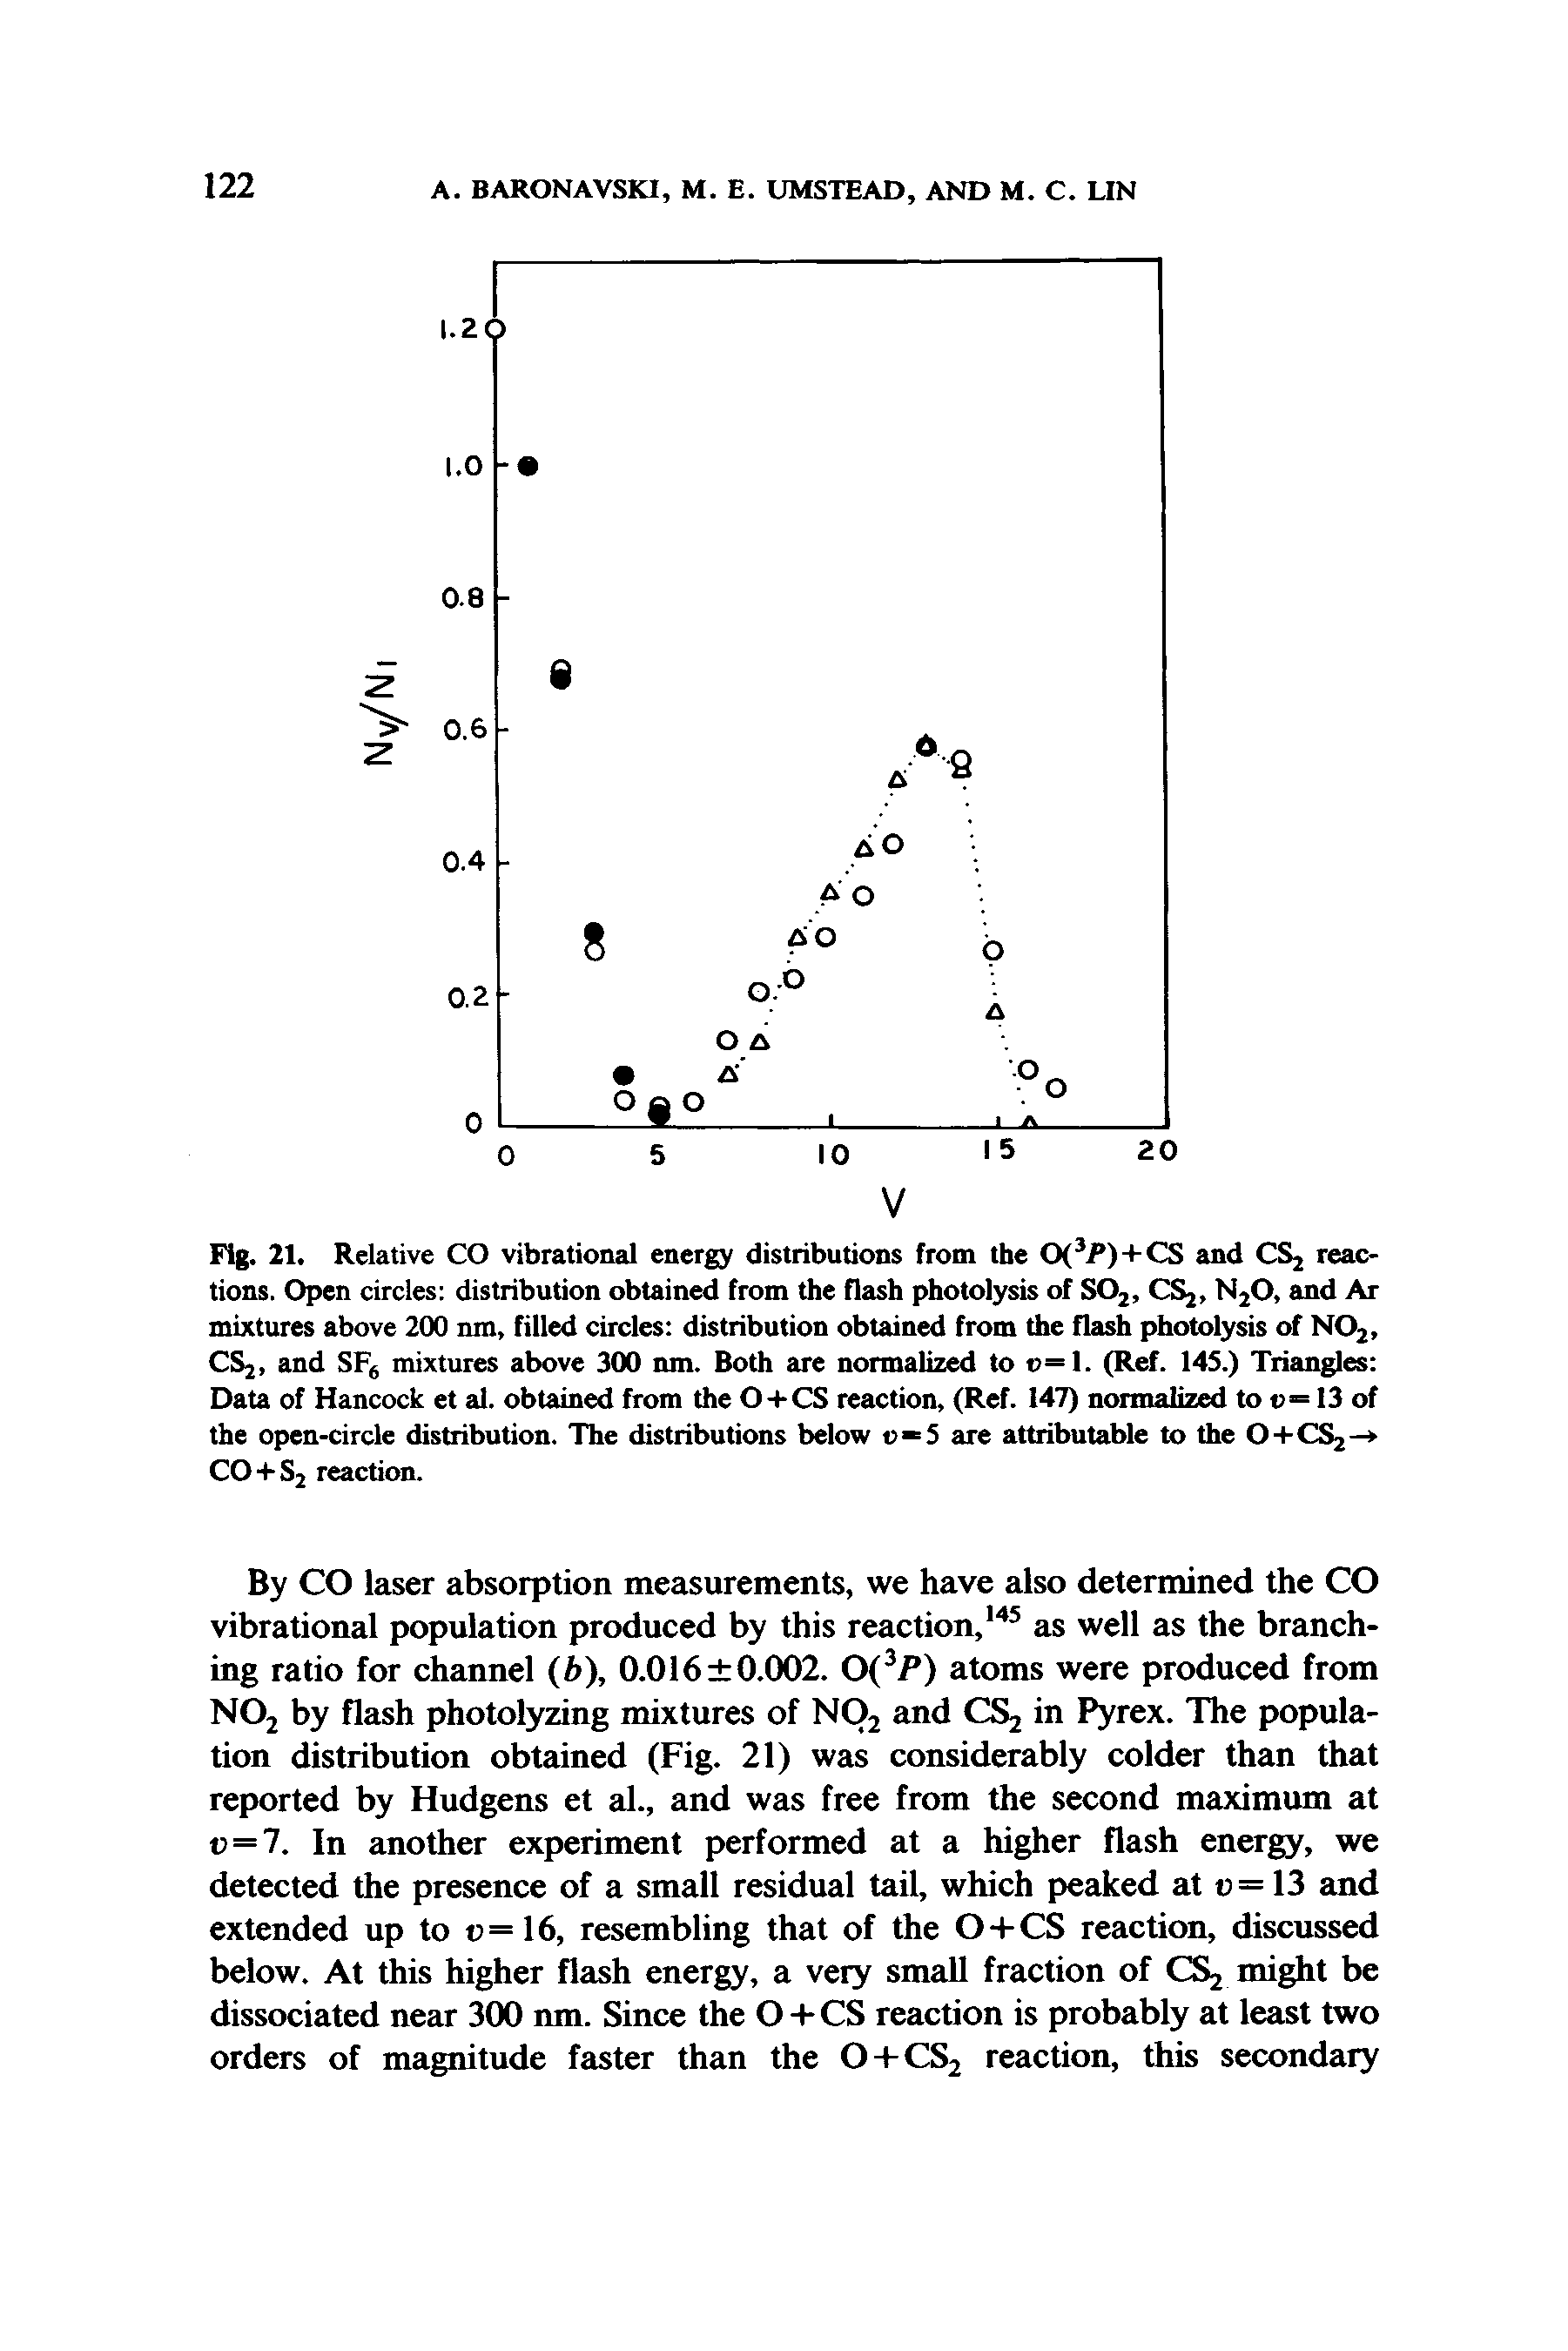 Fig. 21. Relative CO vibrational energy distributions from the 0( R) + CS and CSj reactions. Open circles distribution obtained from the flash photolysis of SOj, CS2, N2O, and Ar mixtures above 200 nm, filled circles distribution obtained from the flash photolysis of NOj, CS2, and SFj mixtures above 300 nm. Both are normalized to c=I. (Ref. 145.) Triangles Data of Hancock et al. obtained from the O + CS reaction, (Ref. 147) normalized to c= 13 of the open-circle distribution. The distributions below c 5 are attributable to the O+CSj CO+ 2 reaction.